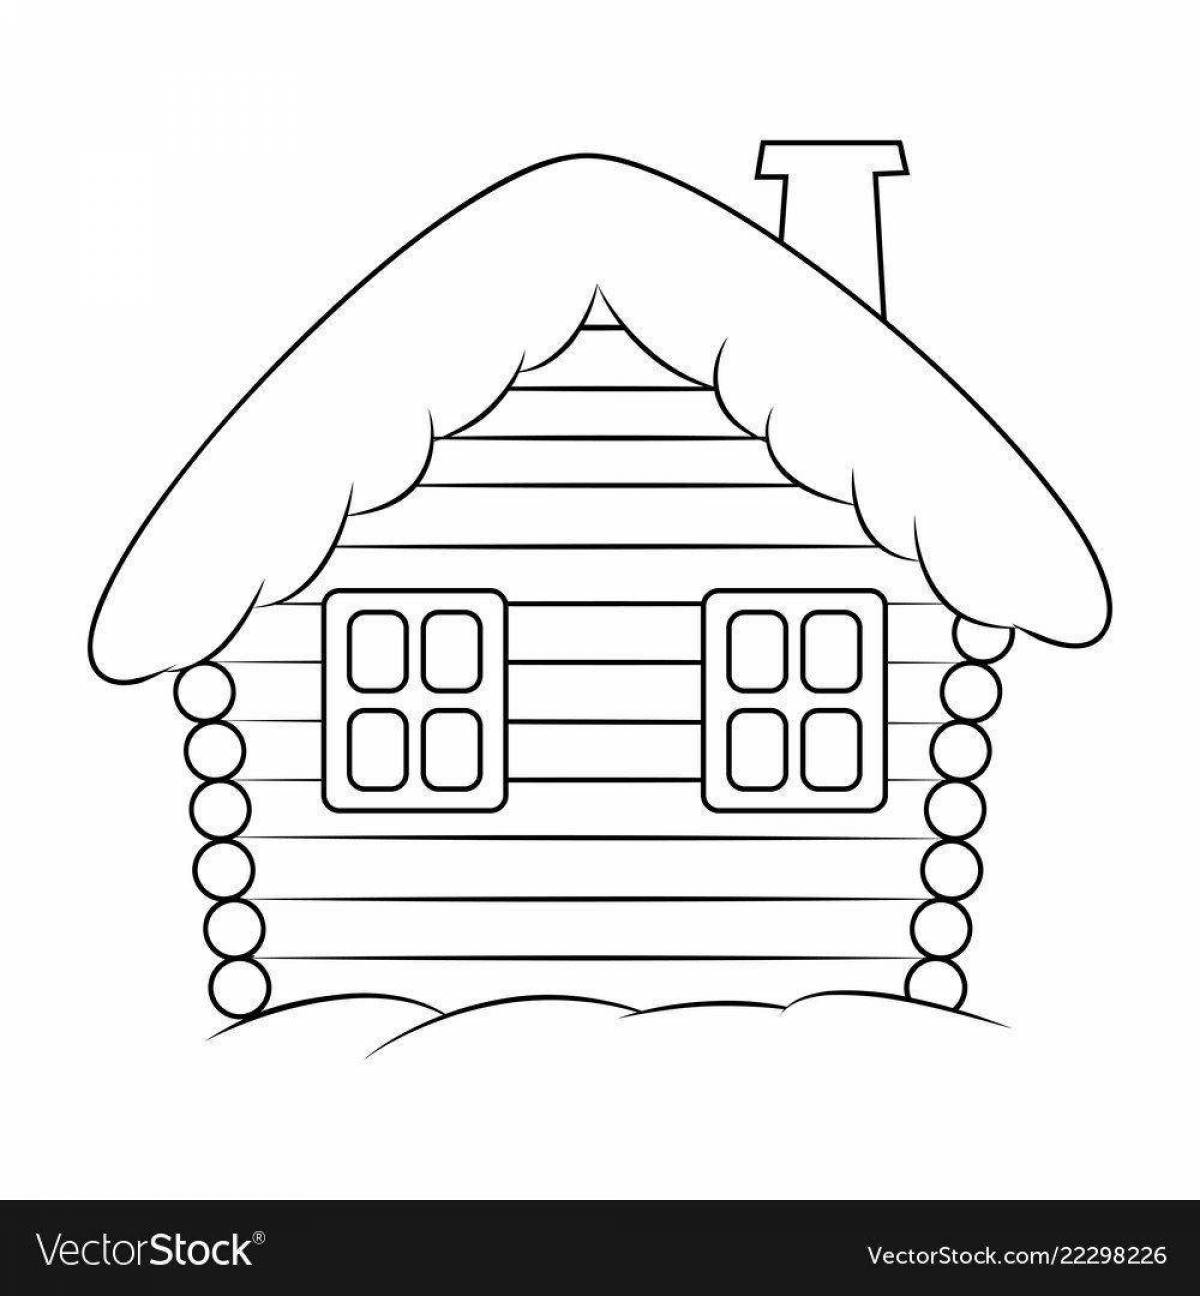 Luxury wooden hut coloring page